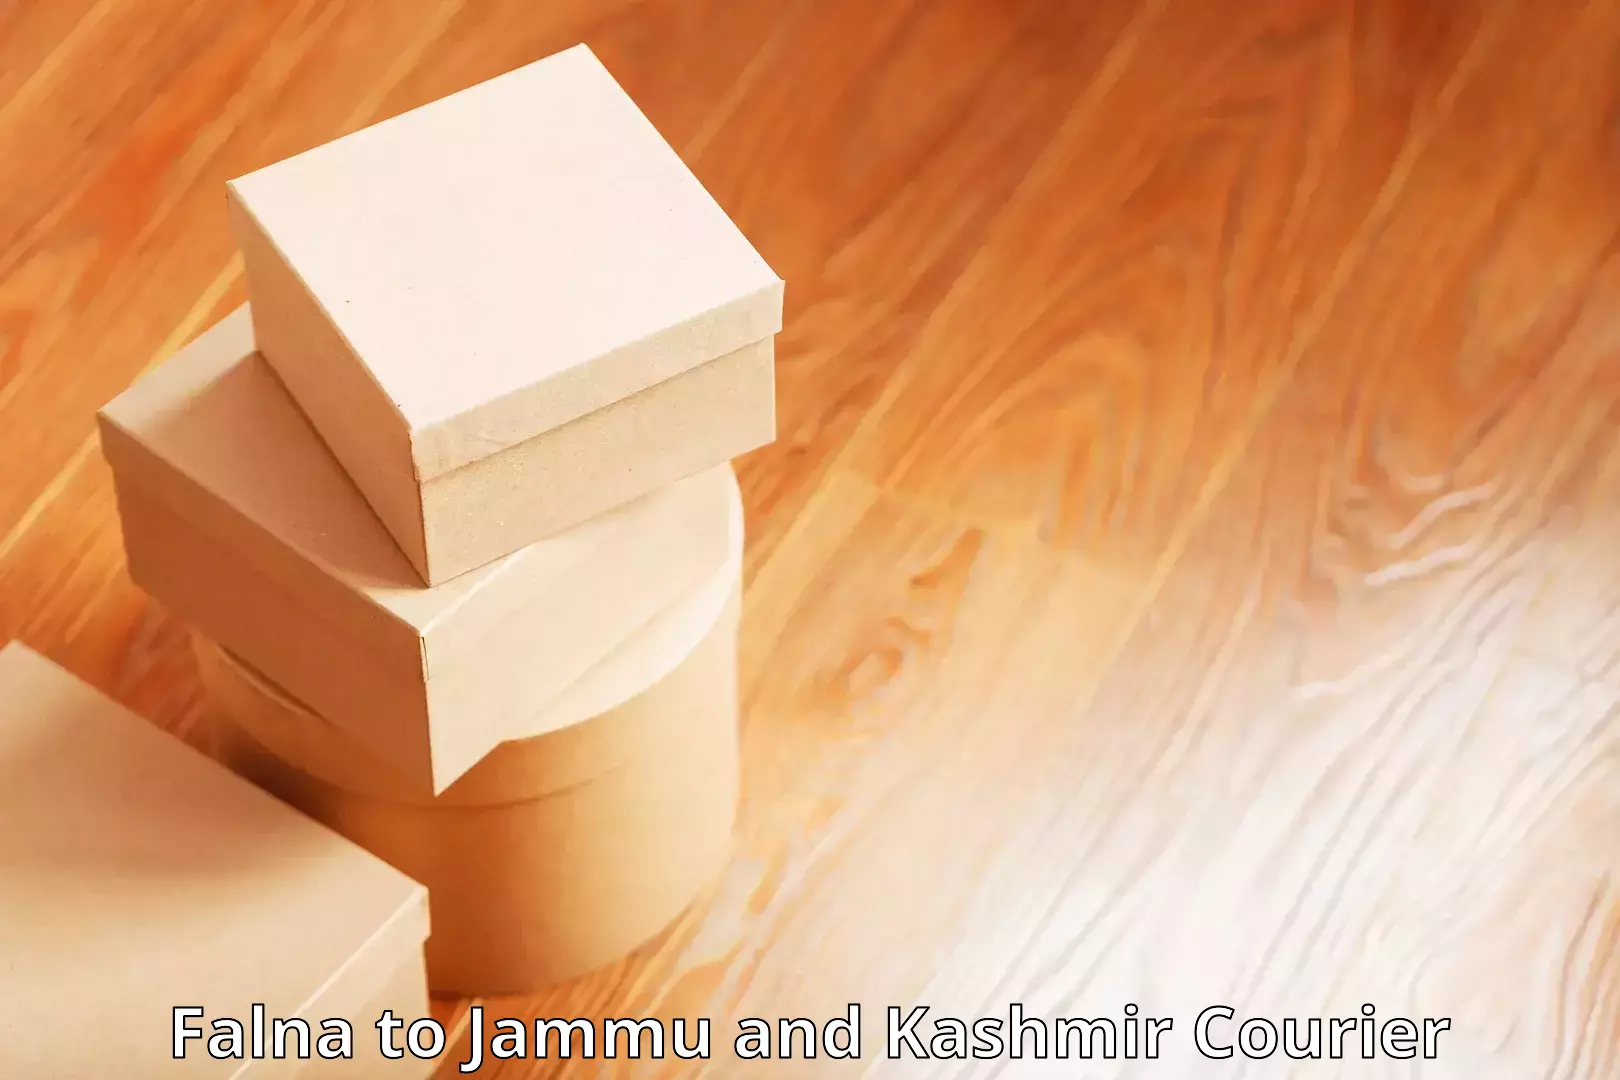 Parcel handling and care in Falna to Baramulla